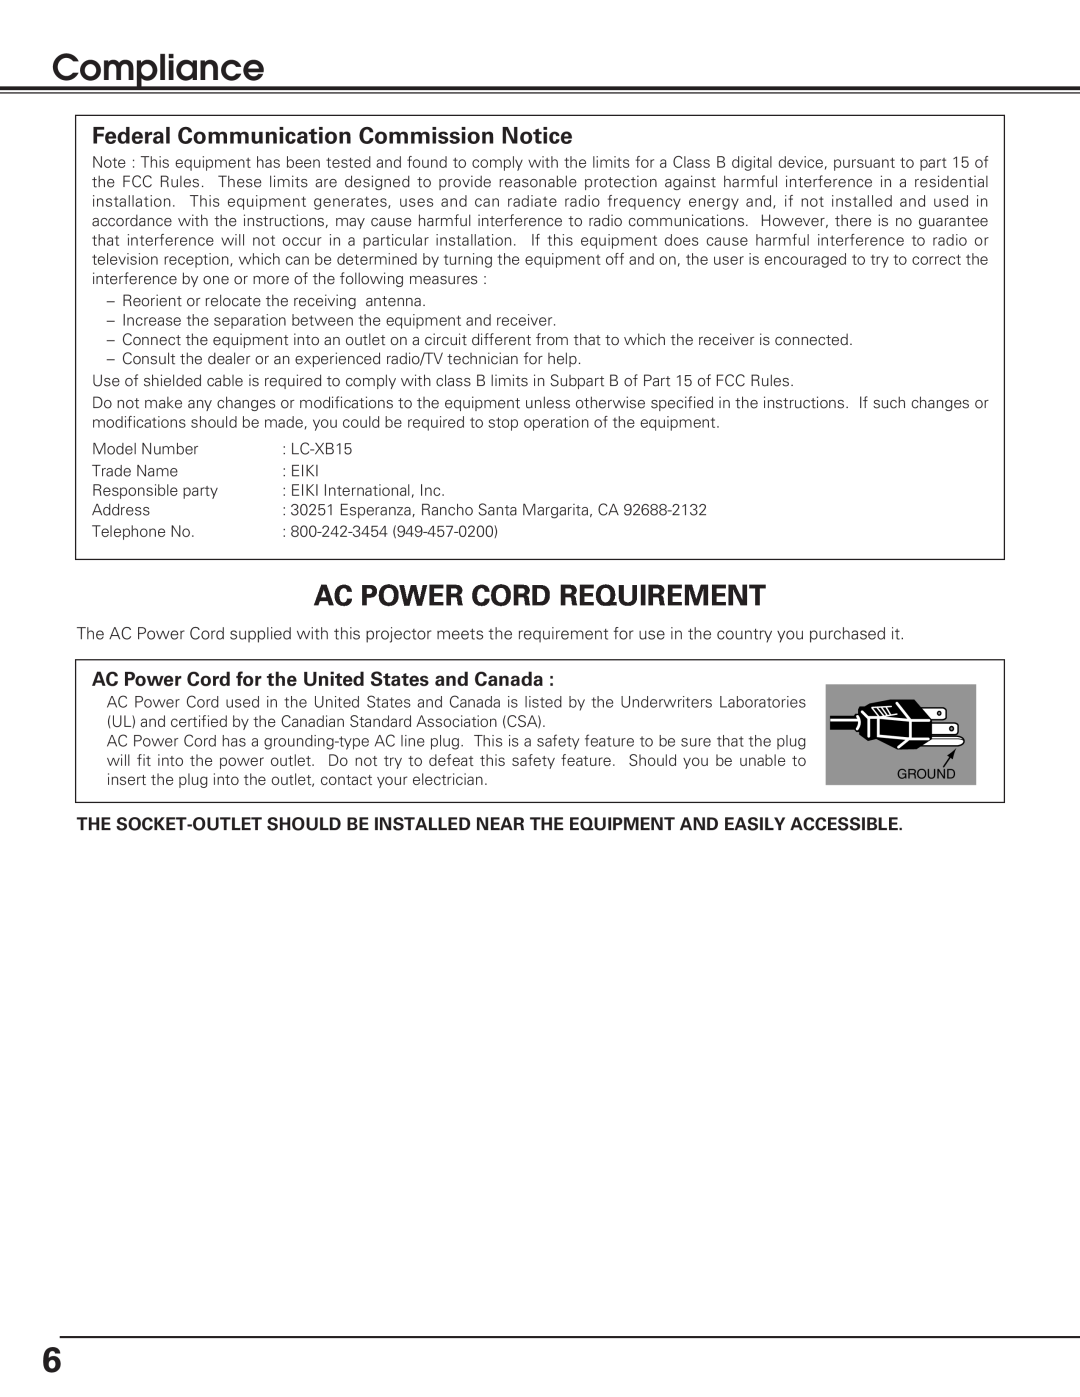 Eiki LC-XB15 owner manual Compliance, Ac Power Cord Requirement, Federal Communication Commission Notice 